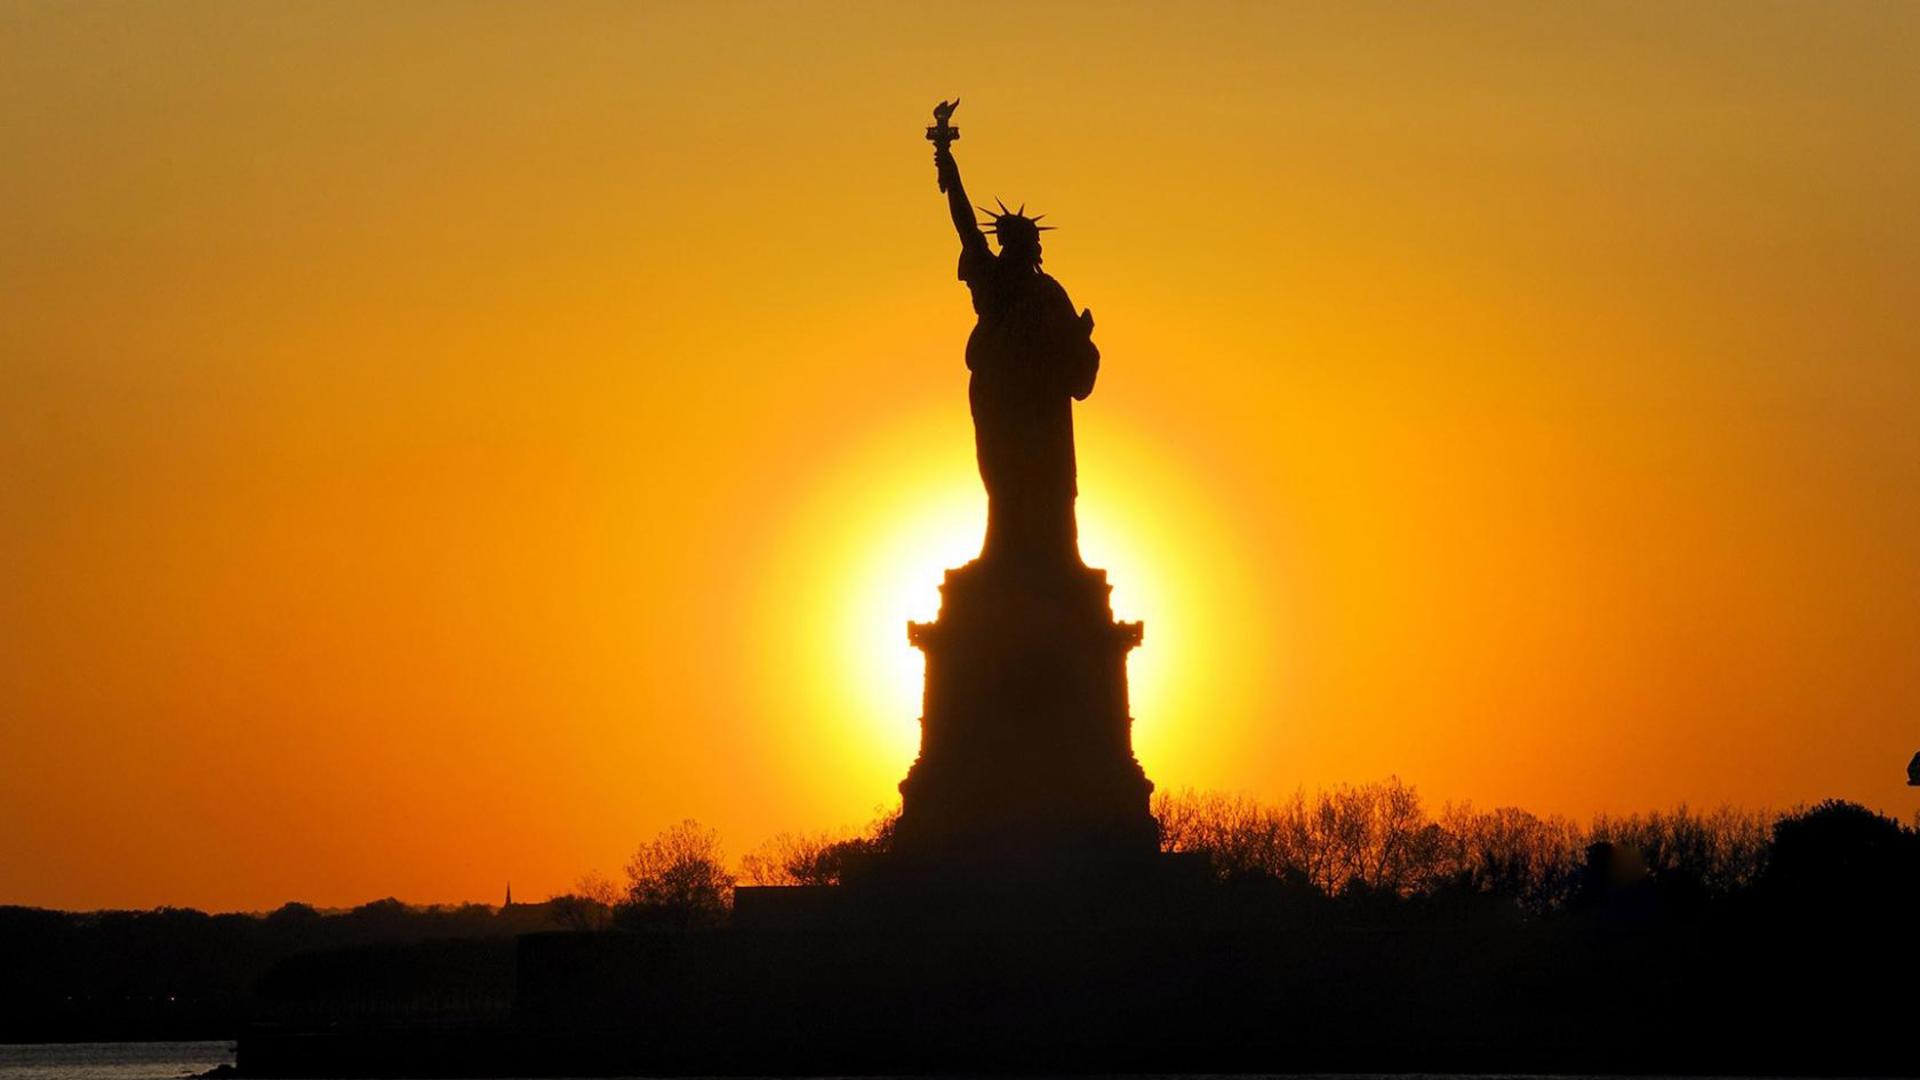 Silhouette Of The Statue Of Liberty In Sunset Hd Desktop ...